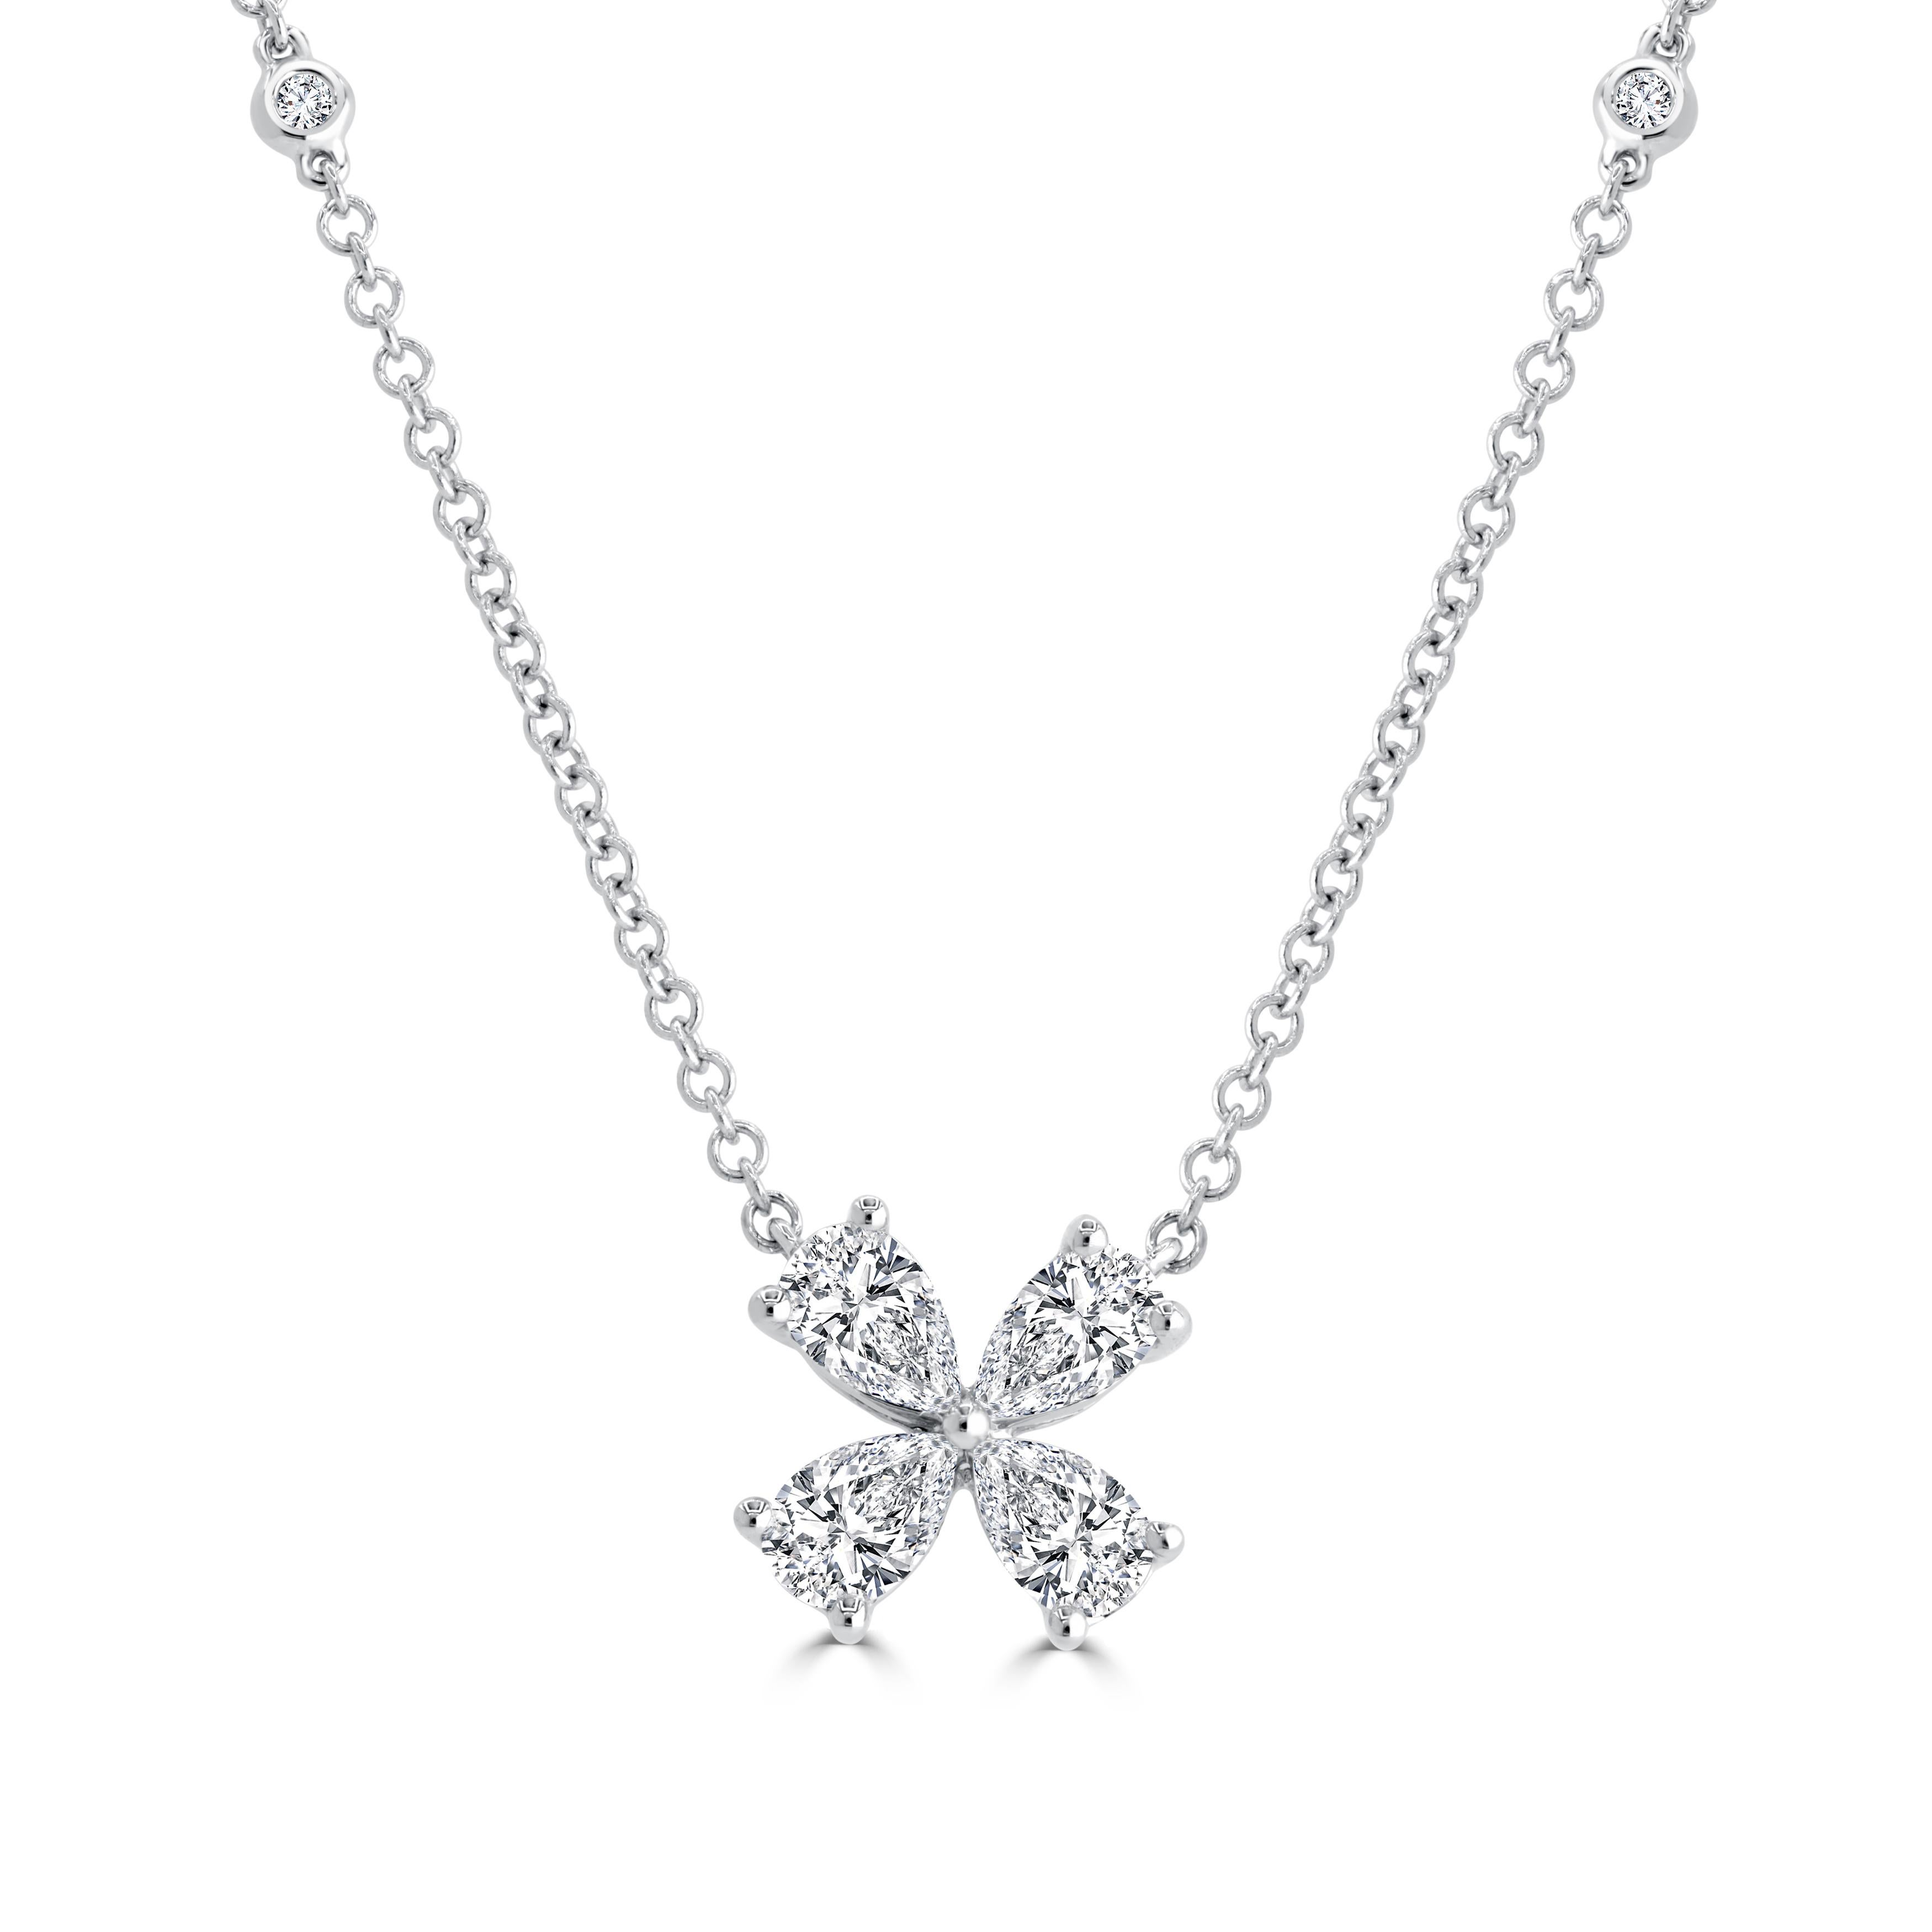 The simplicity of this necklace exudes grace, achieved through the placement of four pear-shaped diamonds forming a captivating pinwheel design. The connected chain is adorned with additional bezel-set diamonds, enhancing its charm.

Total diamond